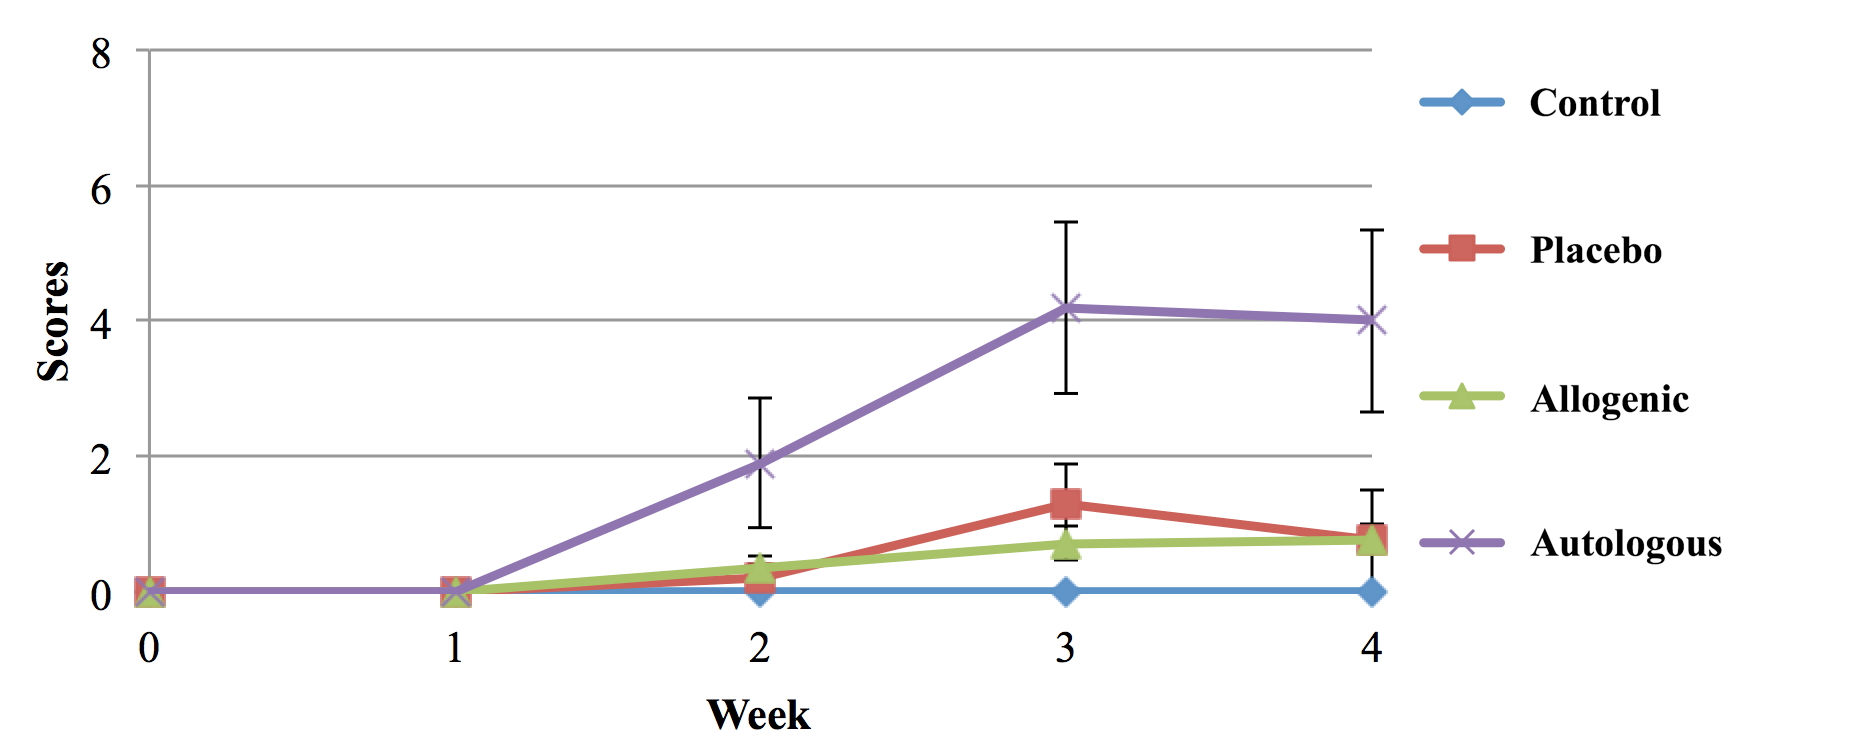 Figure 3
Locomotor score of mice with SCI after various treatments